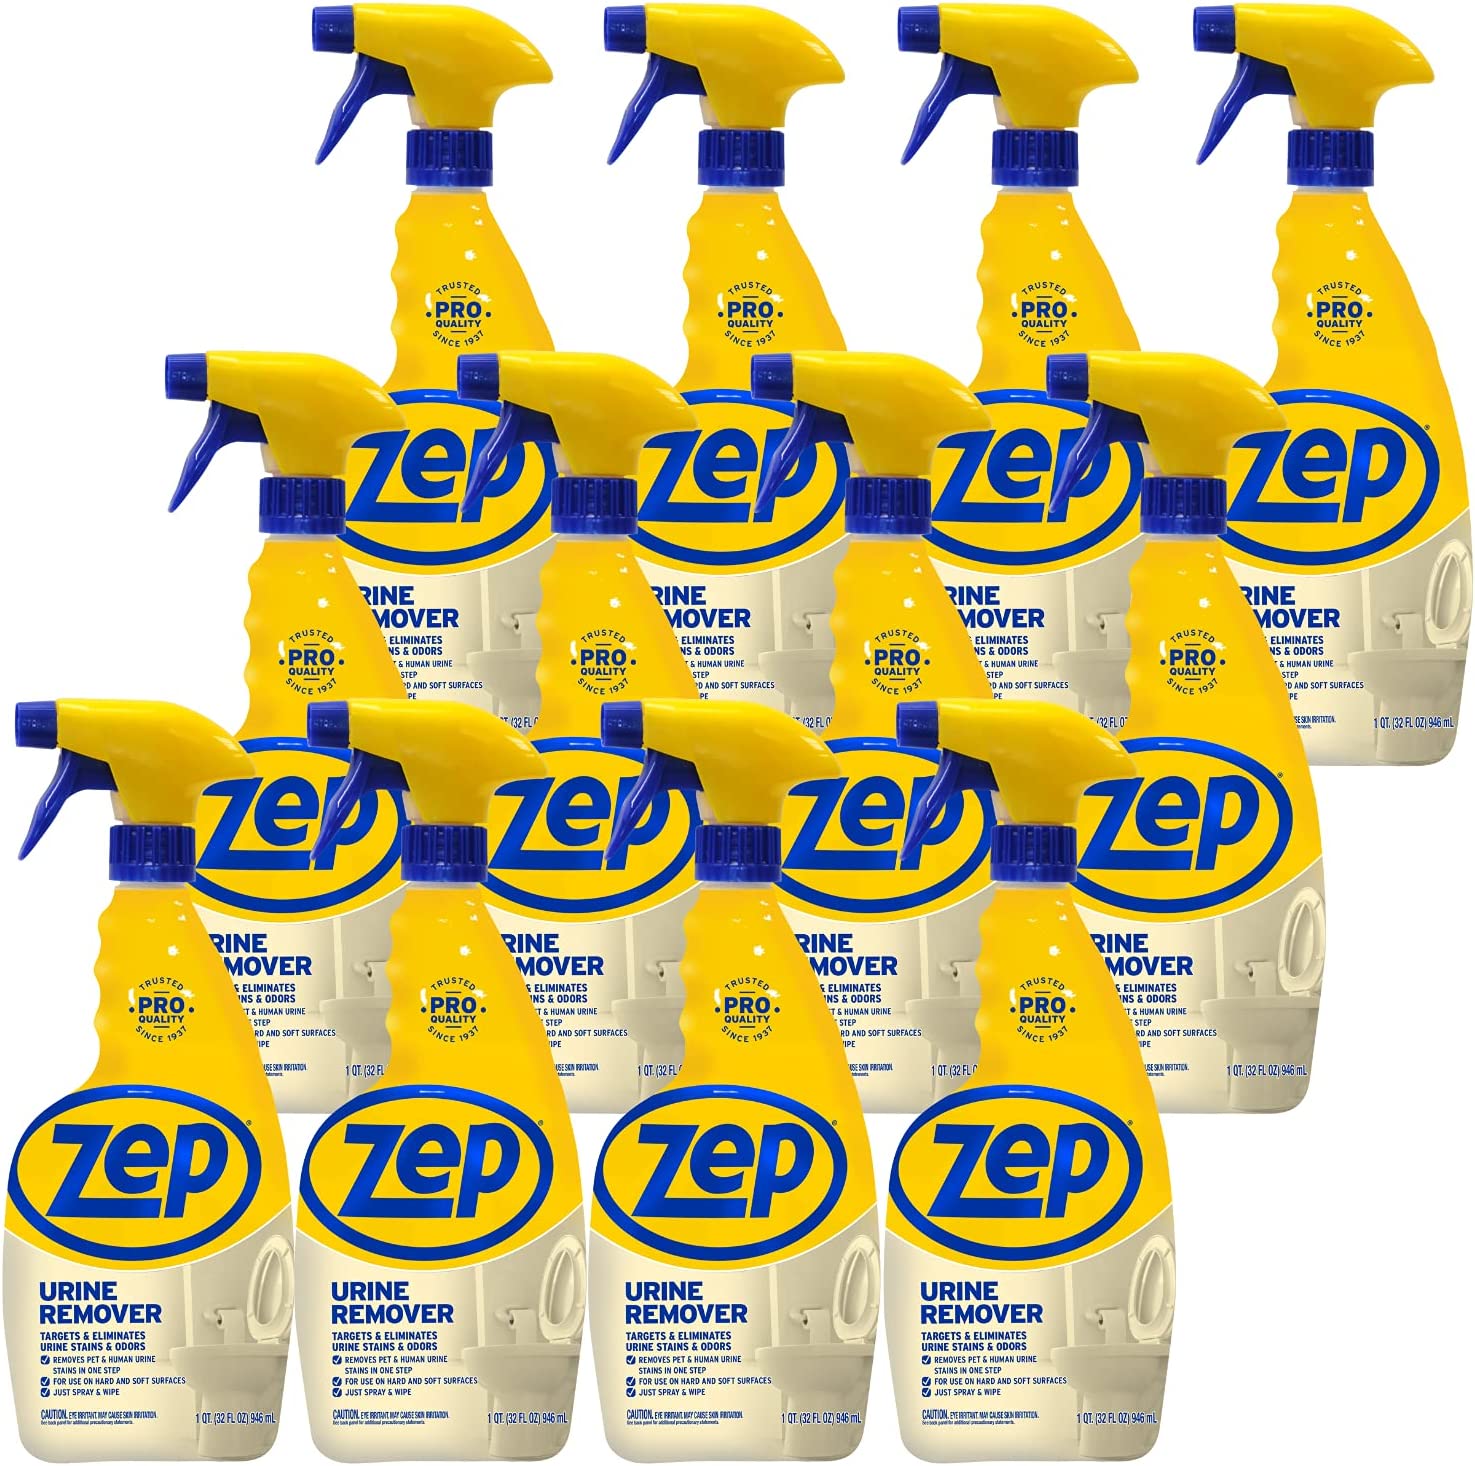 Zep Professional Shower, Tub and Tile Cleaner, 32 Ounce 